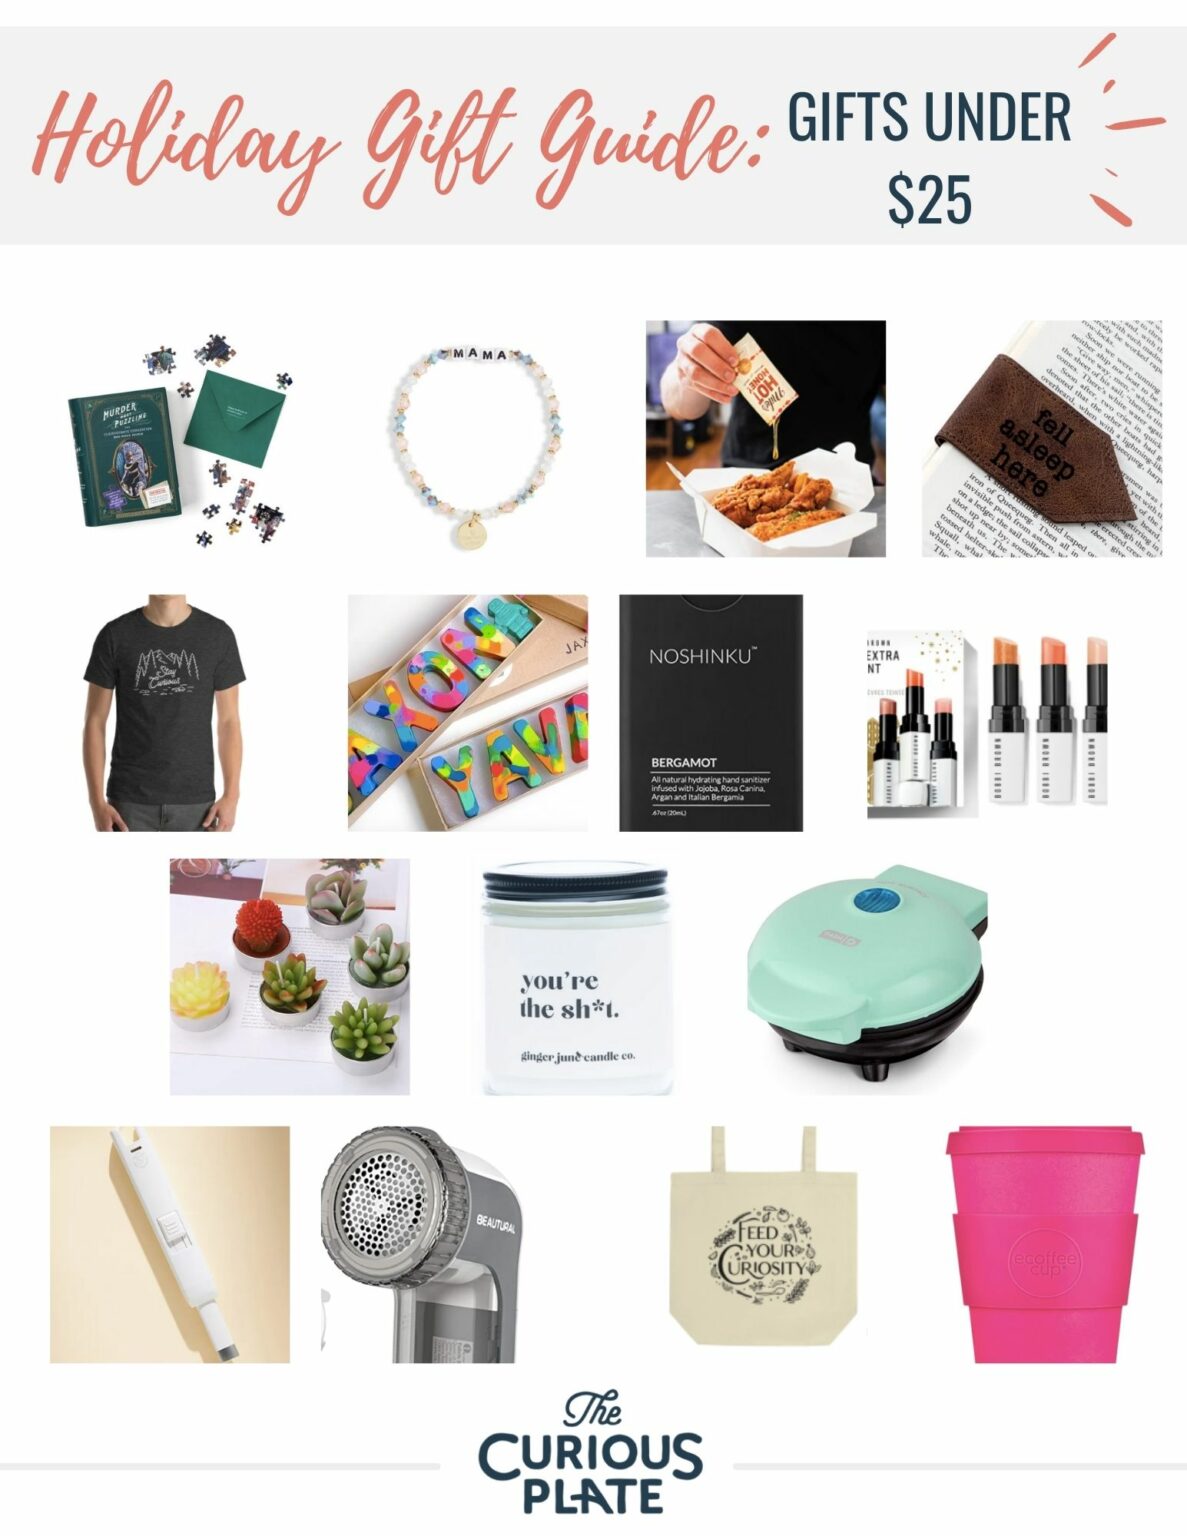 2021 Holiday Gift Guide: Gifts Under $25